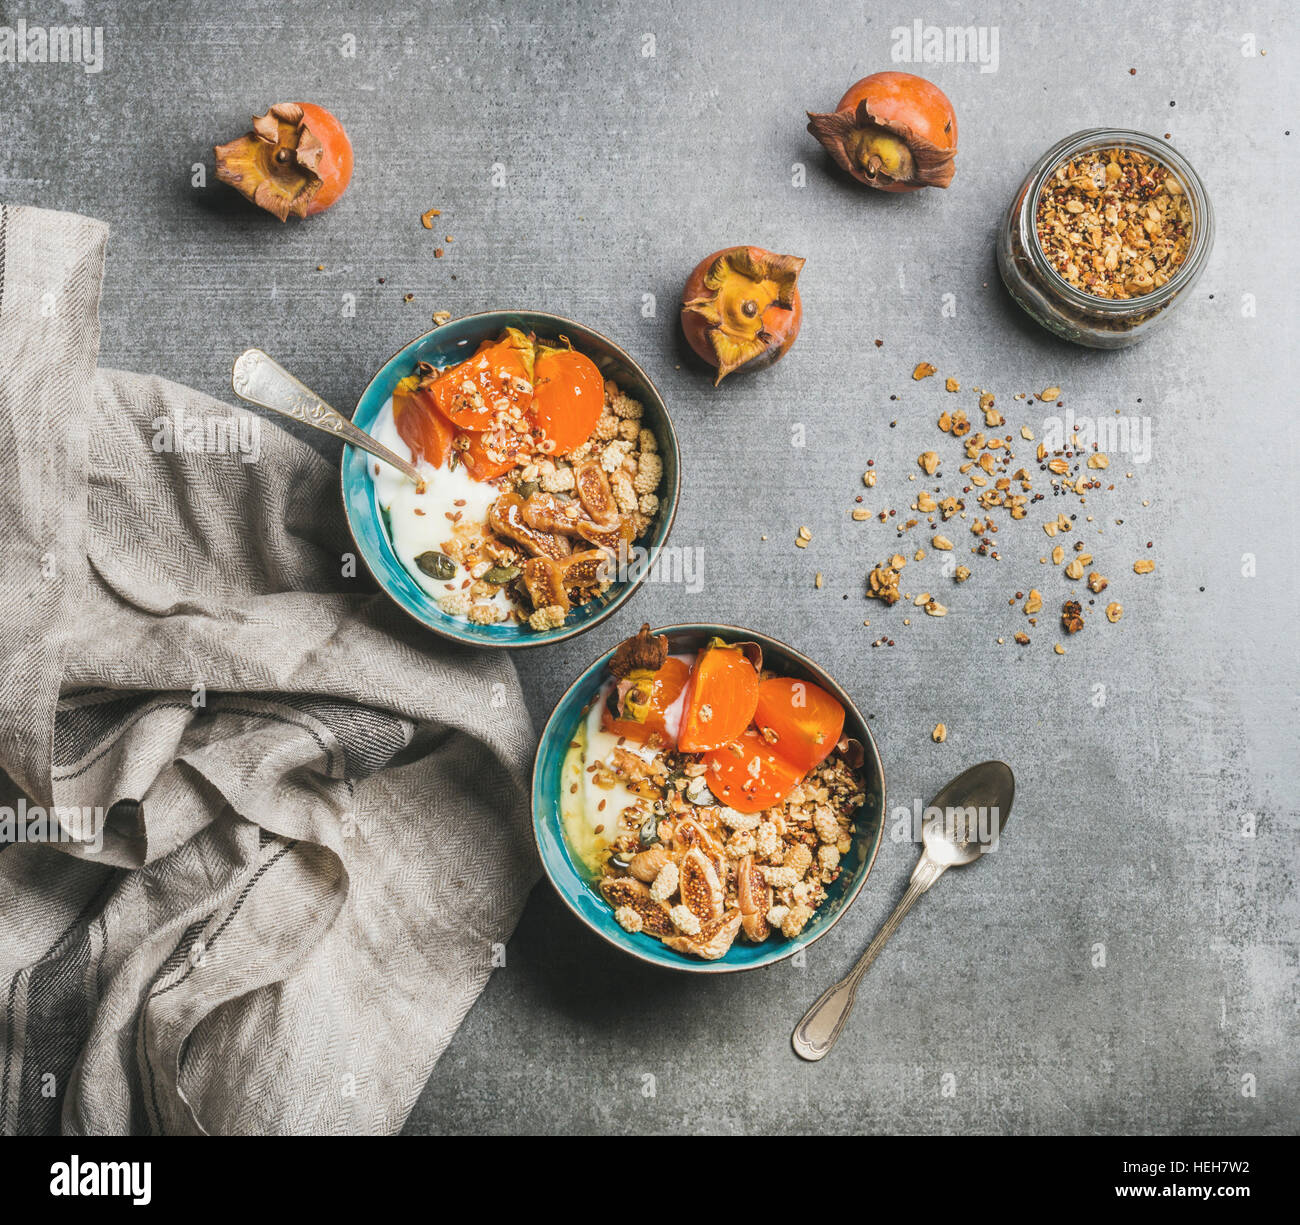 Healthy vegetarian breakfast bowls. Oatmeal and quinoa granola with yogurt, dried fruit, seeds, honey and persimmon in colorful bowls over grey concre Stock Photo